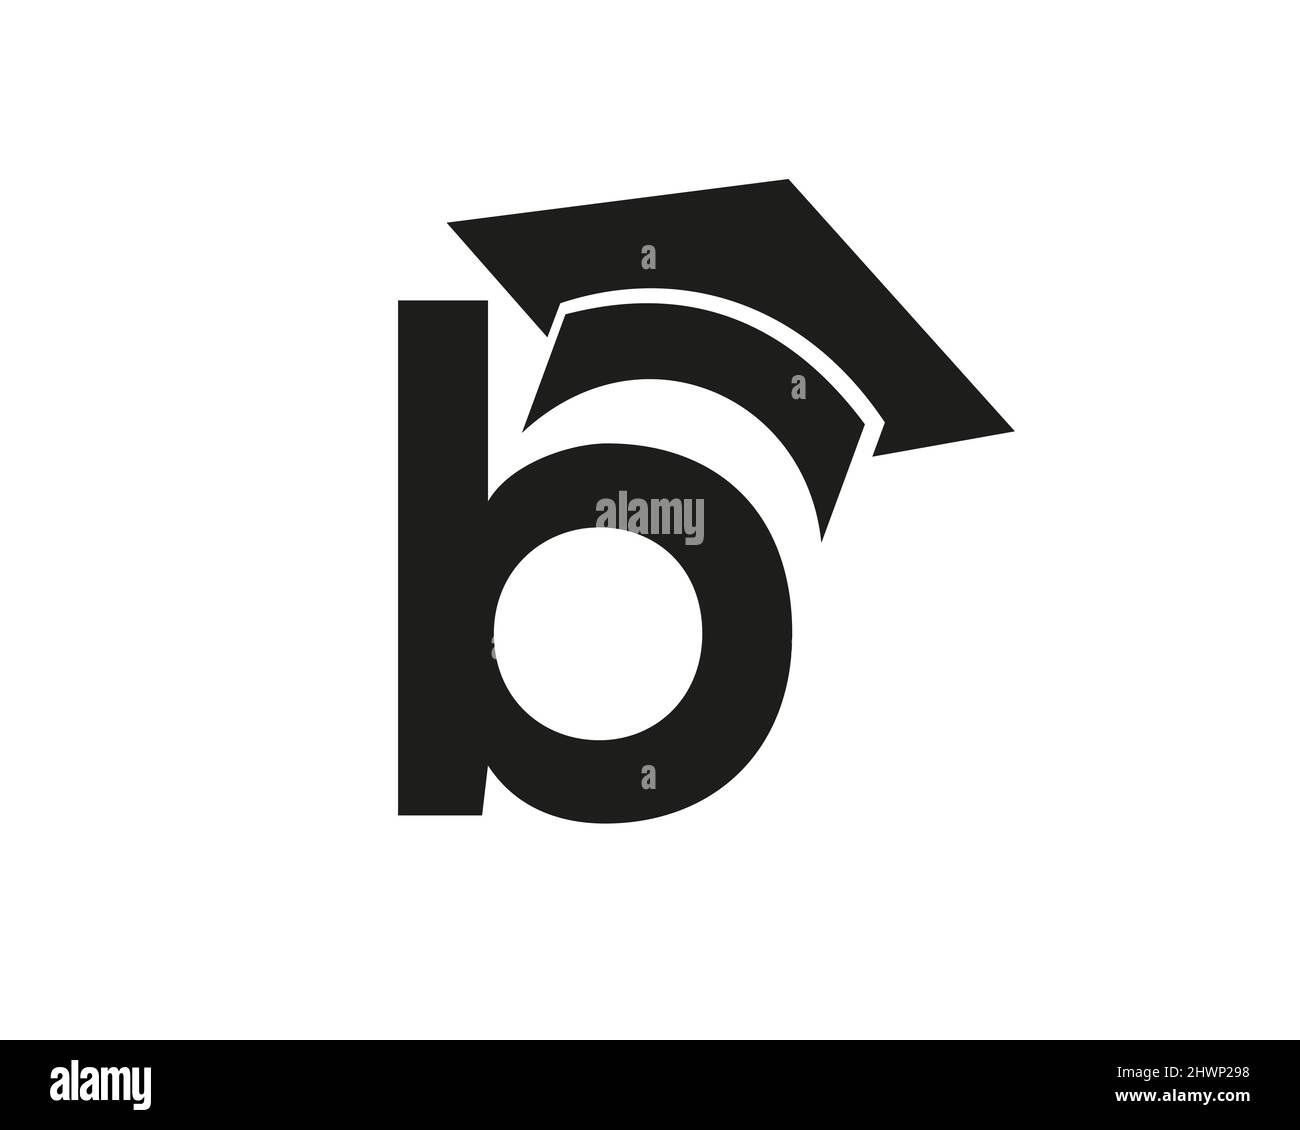 Letter B Education Logo Template. Education Logo On B Letter, Initial Education Hat Concept Template Stock Vector